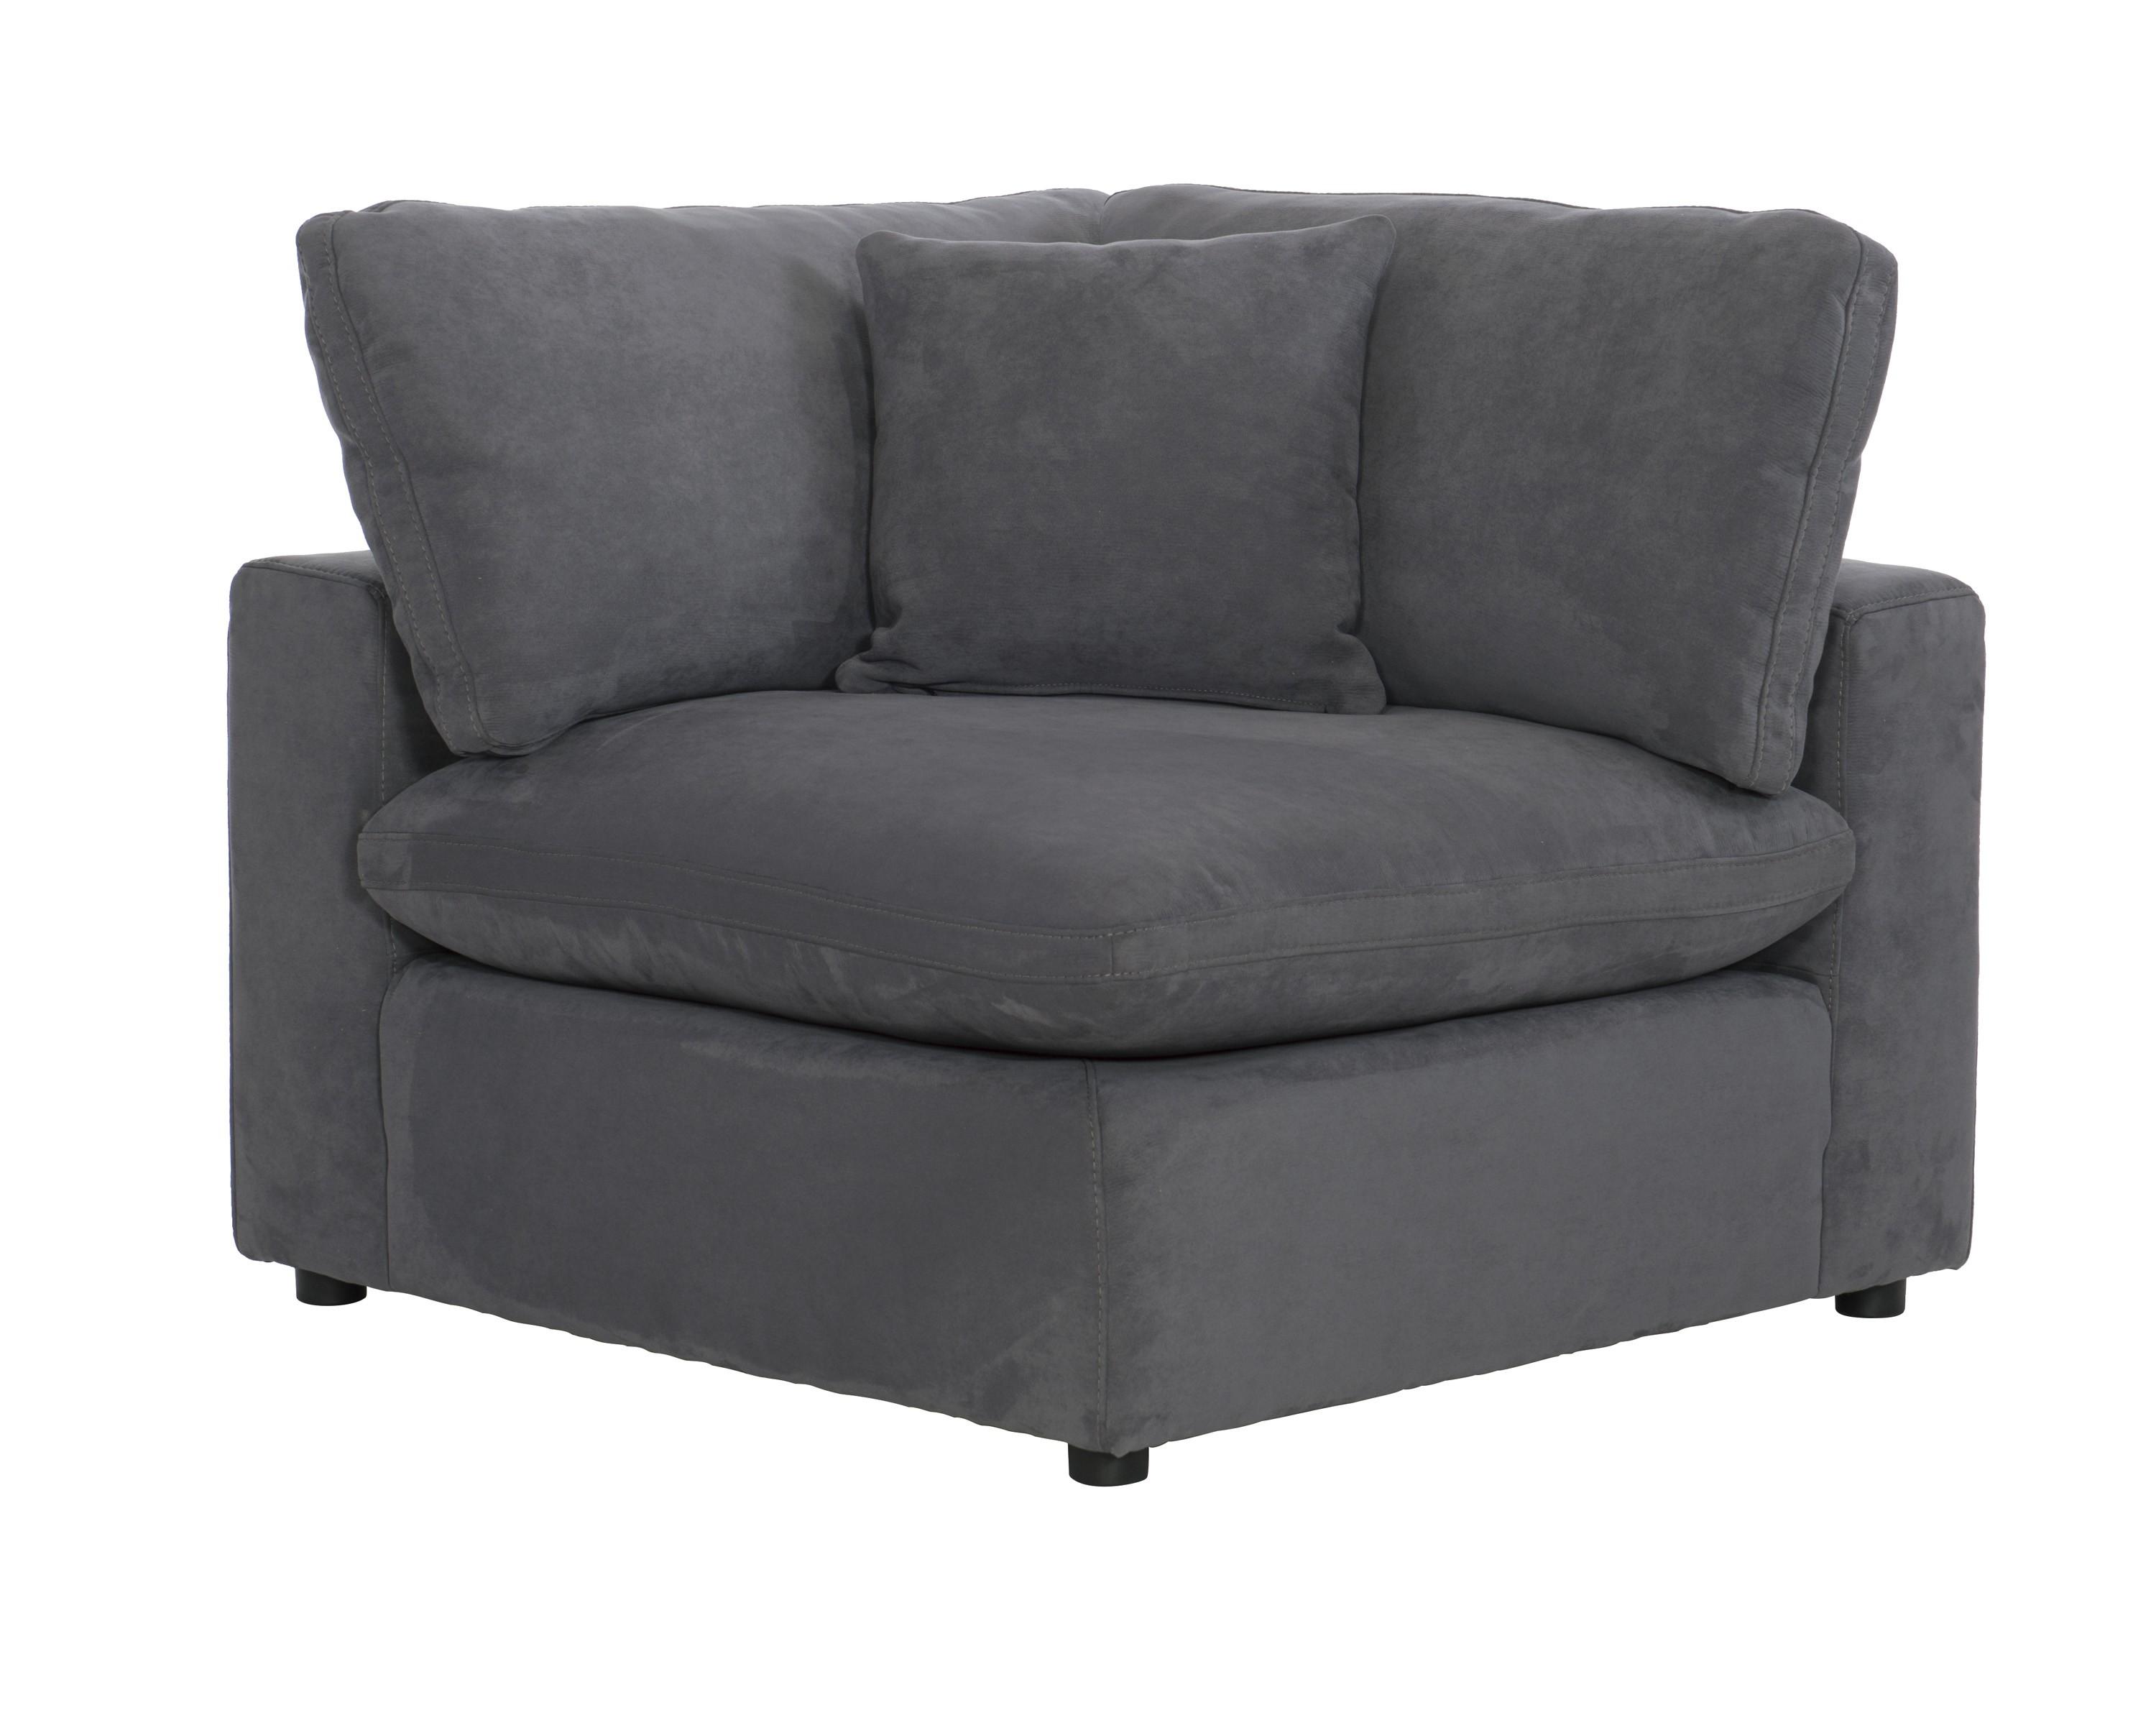 Transitional Corner Seat 9546GY-CR Guthrie 9546GY-CR in Gray Microfiber